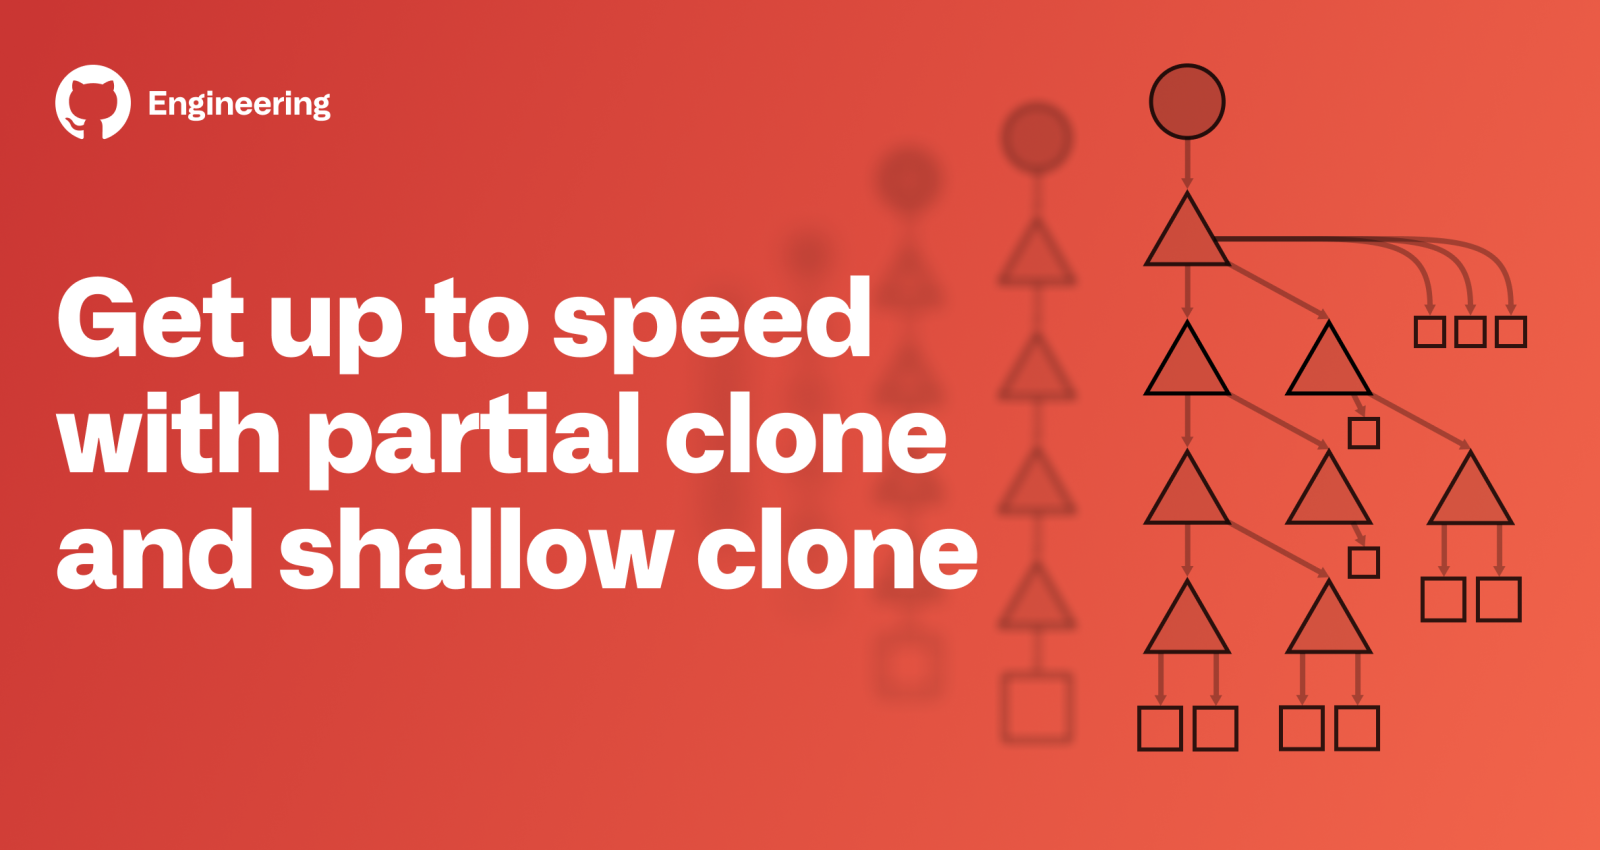 Get up to speed with partial clone and shallow clone